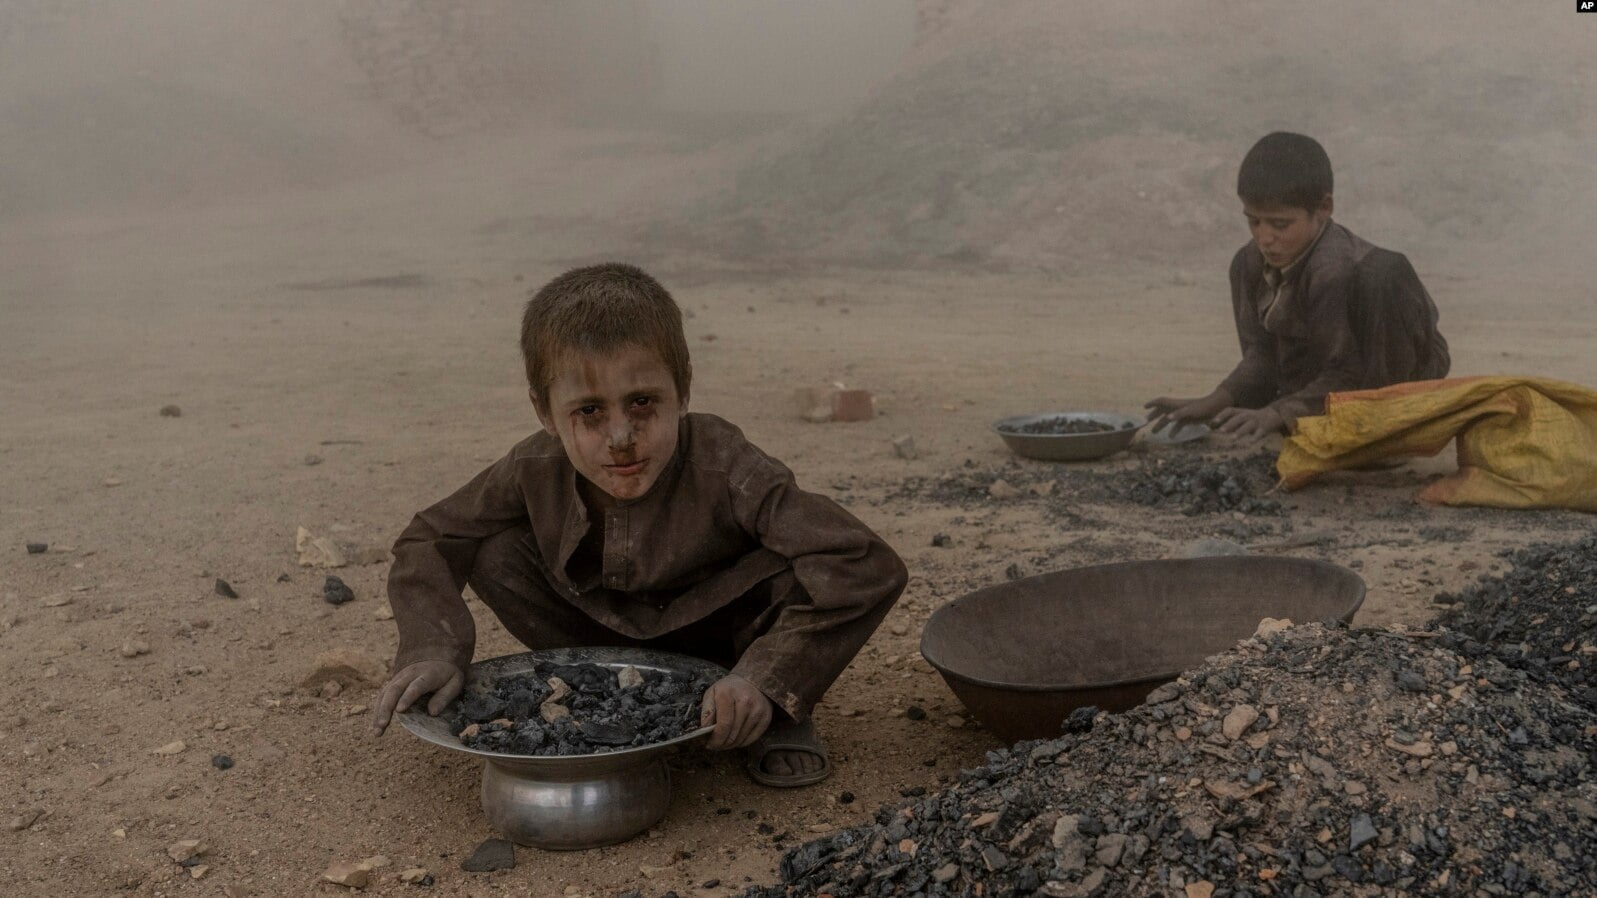 According to the UNDP, approximately 85% of Afghans live on less than one dollar daily, a situation that has markedly worsened since August 2021.